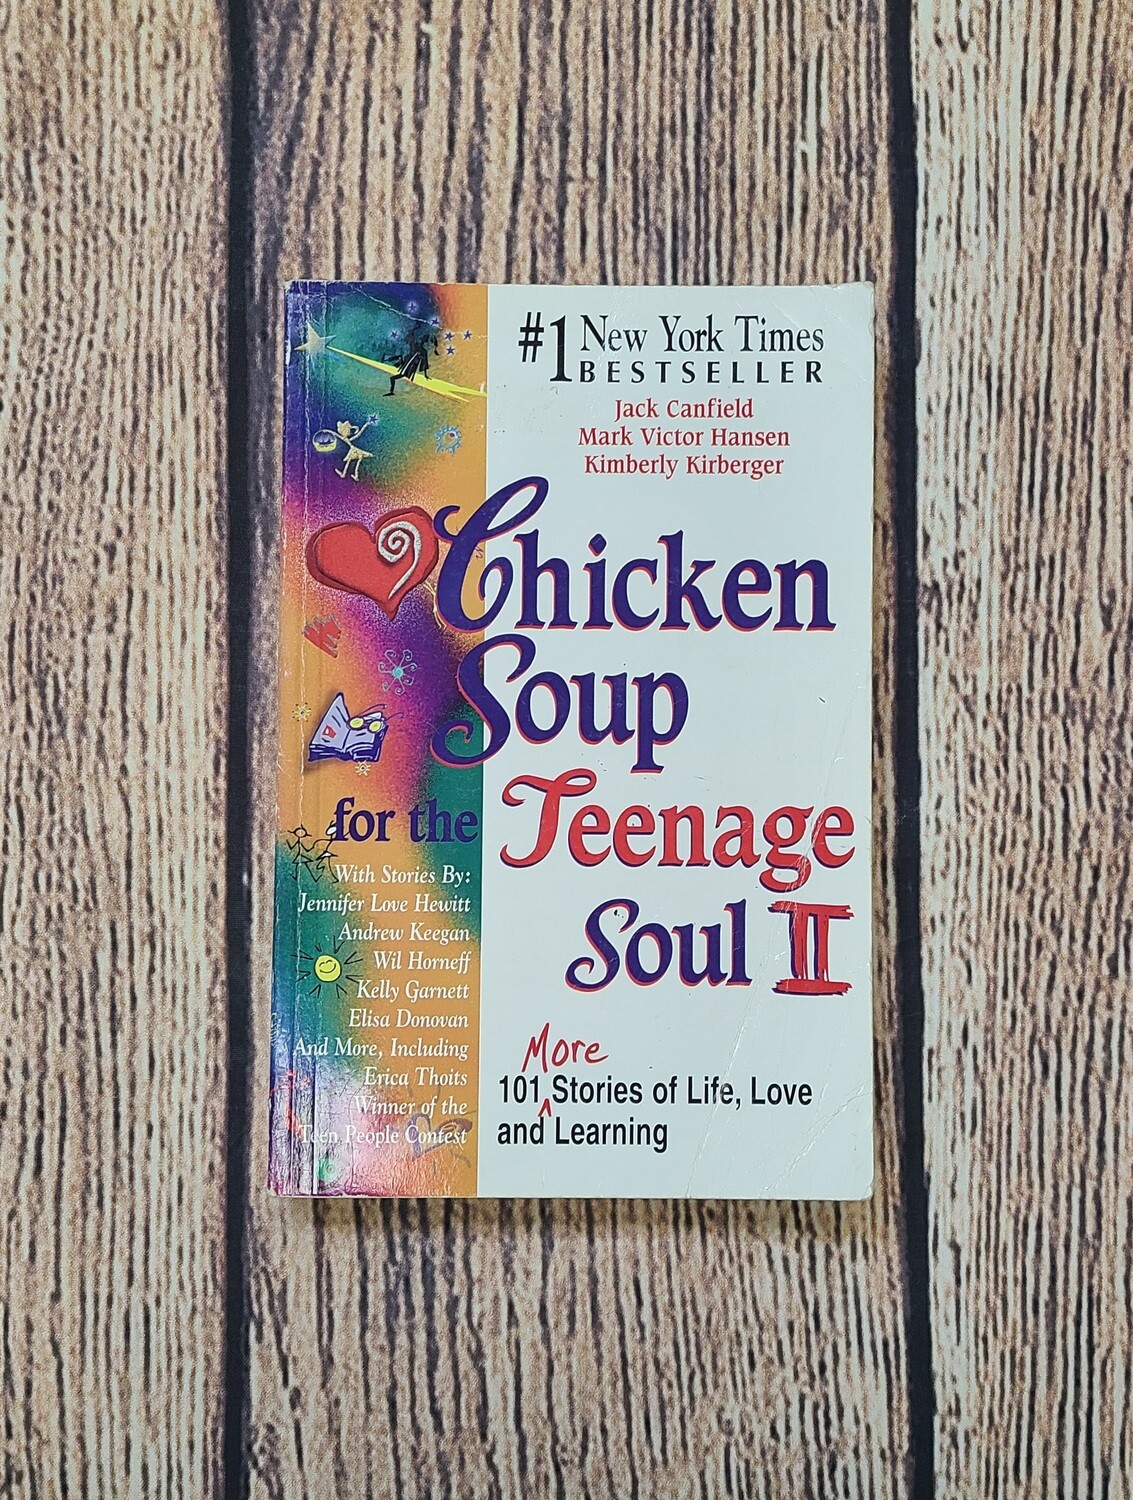 Chicken Soup for the Teenage Soul II by Jack Canfield, Mark Victor Hansen and Kimberly Kirberger